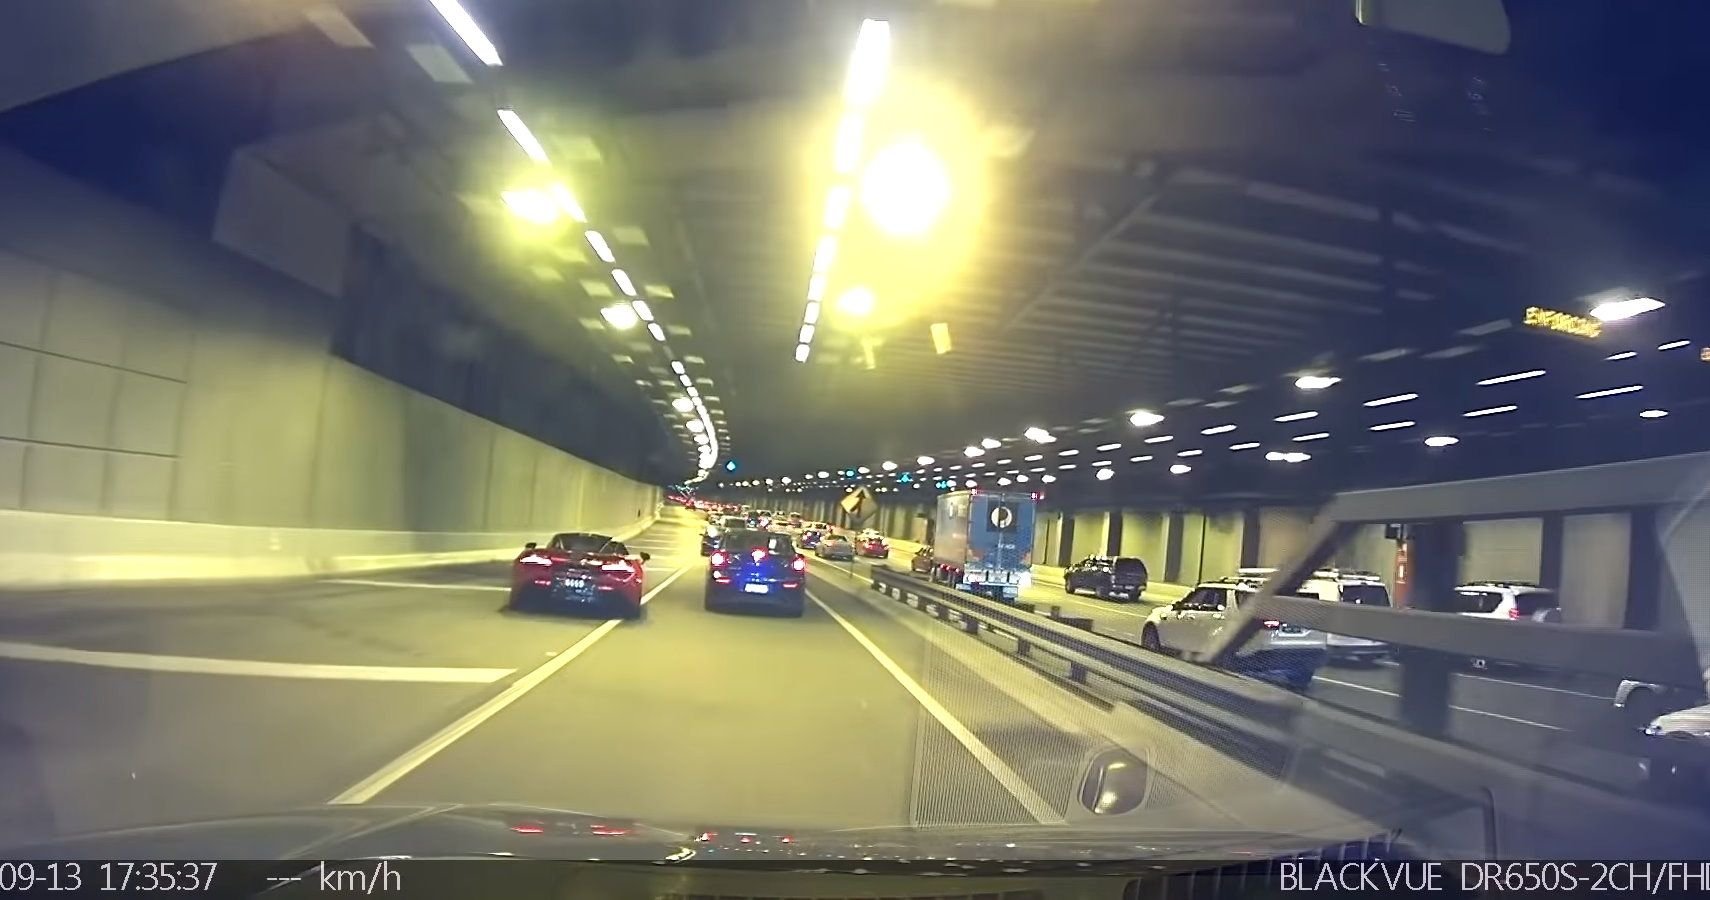 Watch A McLaren Driver Get Arrested For Driving In The Emergency Lane